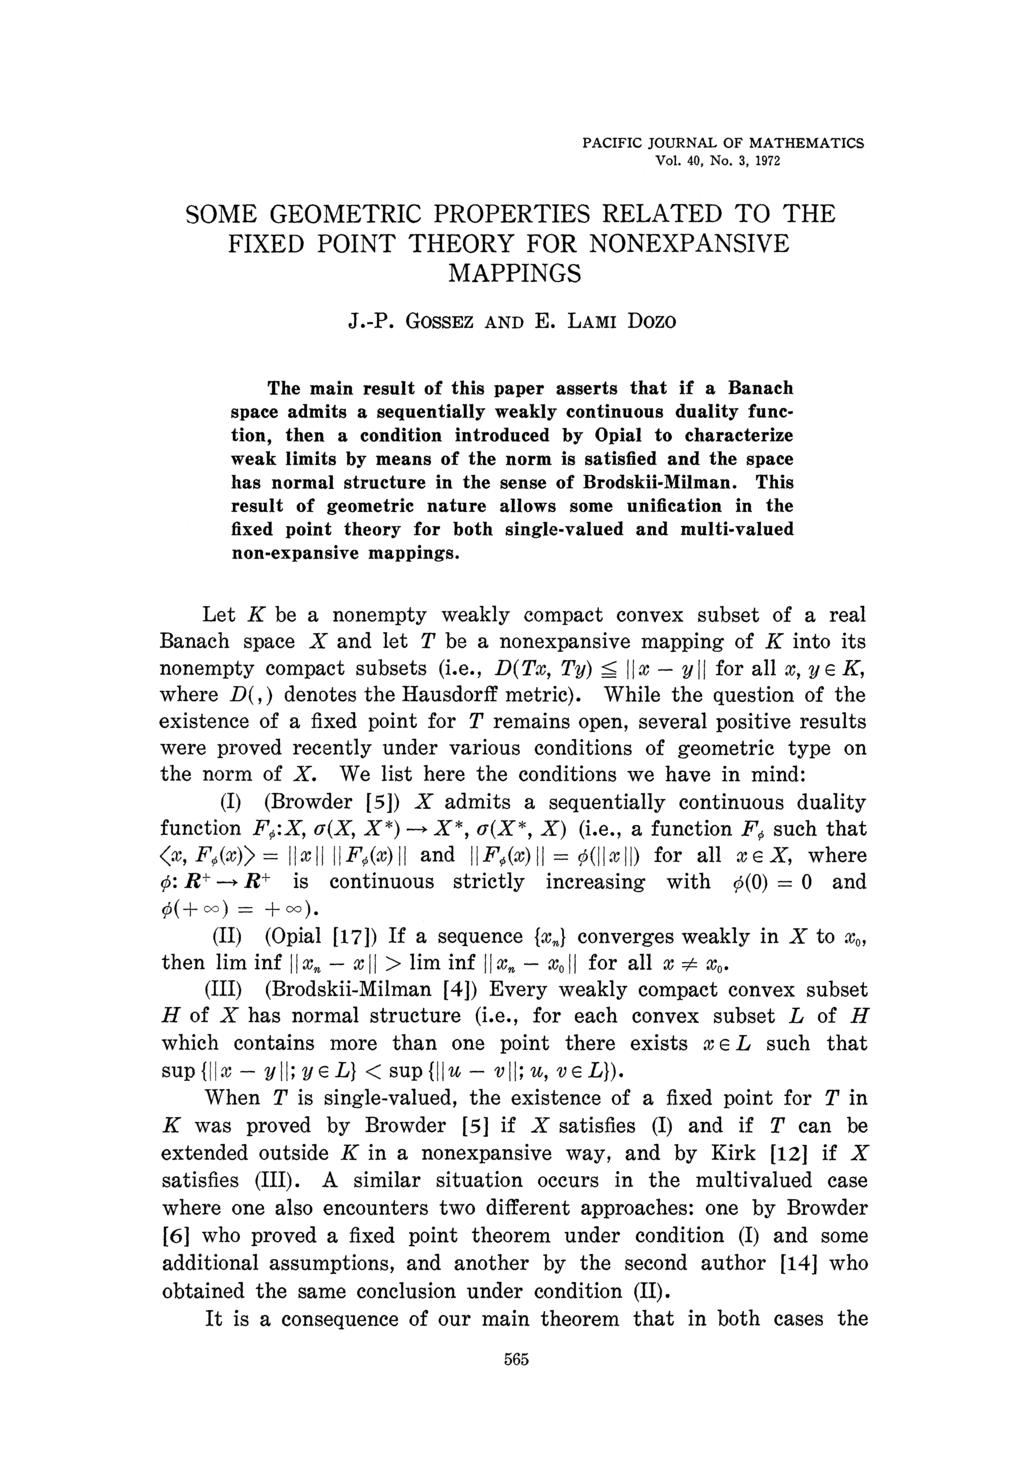 PACIFIC JOURNAL OF MATHEMATICS Vol. 40, No. 3, 1972 SOME GEOMETRIC PROPERTIES RELATED TO THE FIXED POINT THEORY FOR NONEXPANSIVE MAPPINGS J.-P. GOSSEZ AND E.